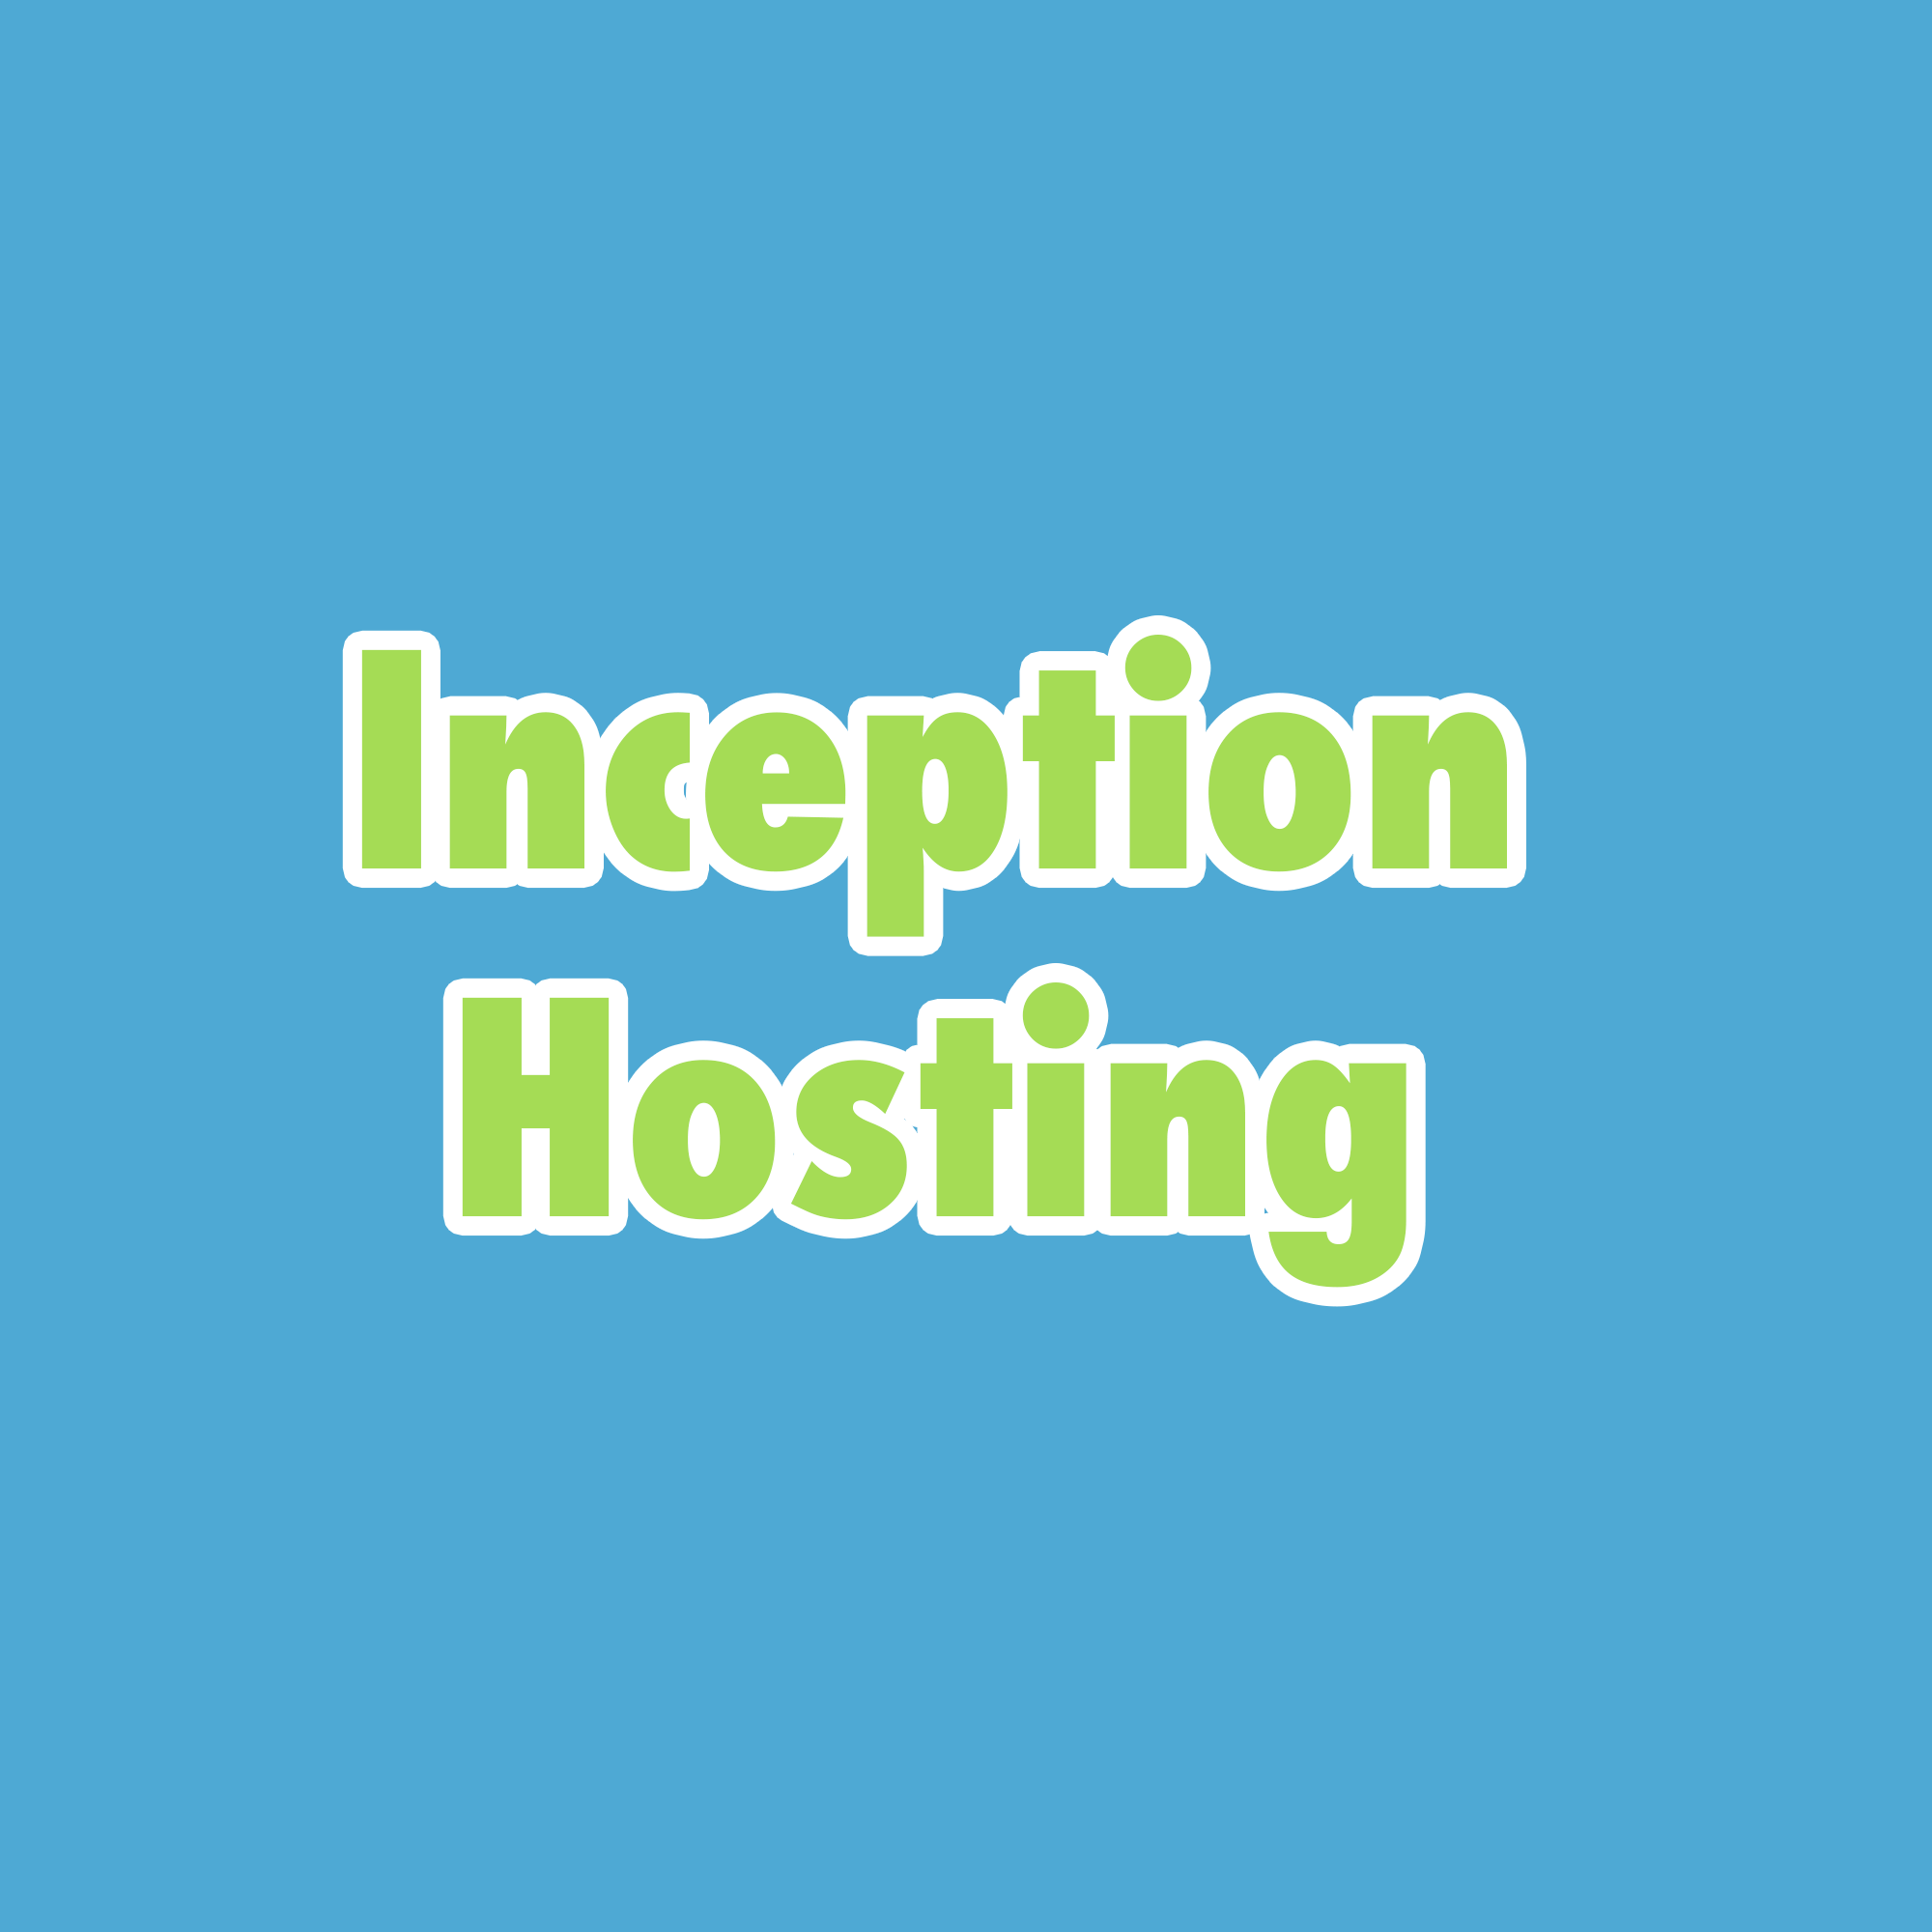 inception hosting Archives – LowEndBox